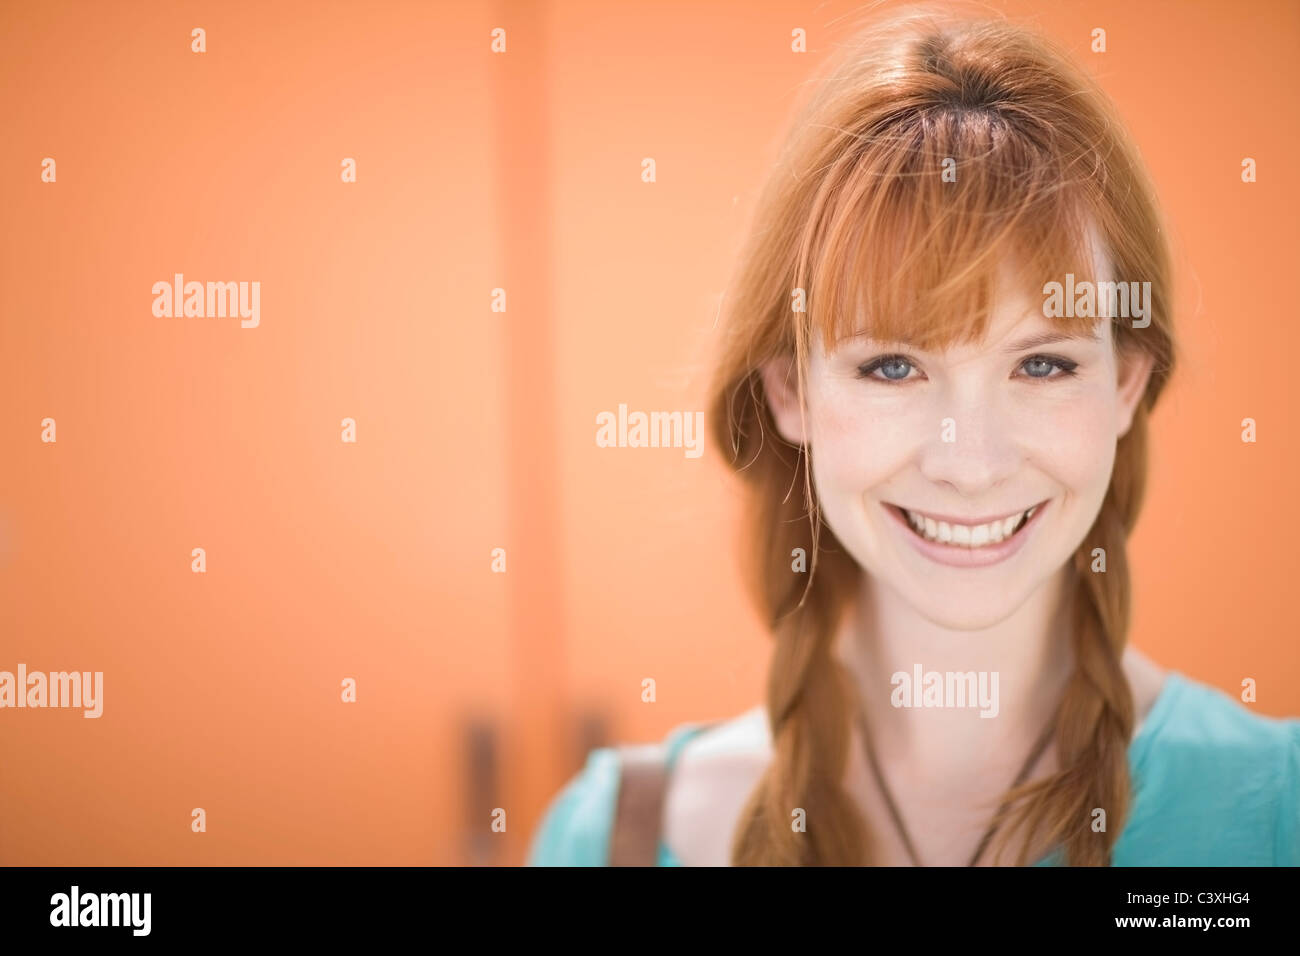 Red haired woman smiling Banque D'Images